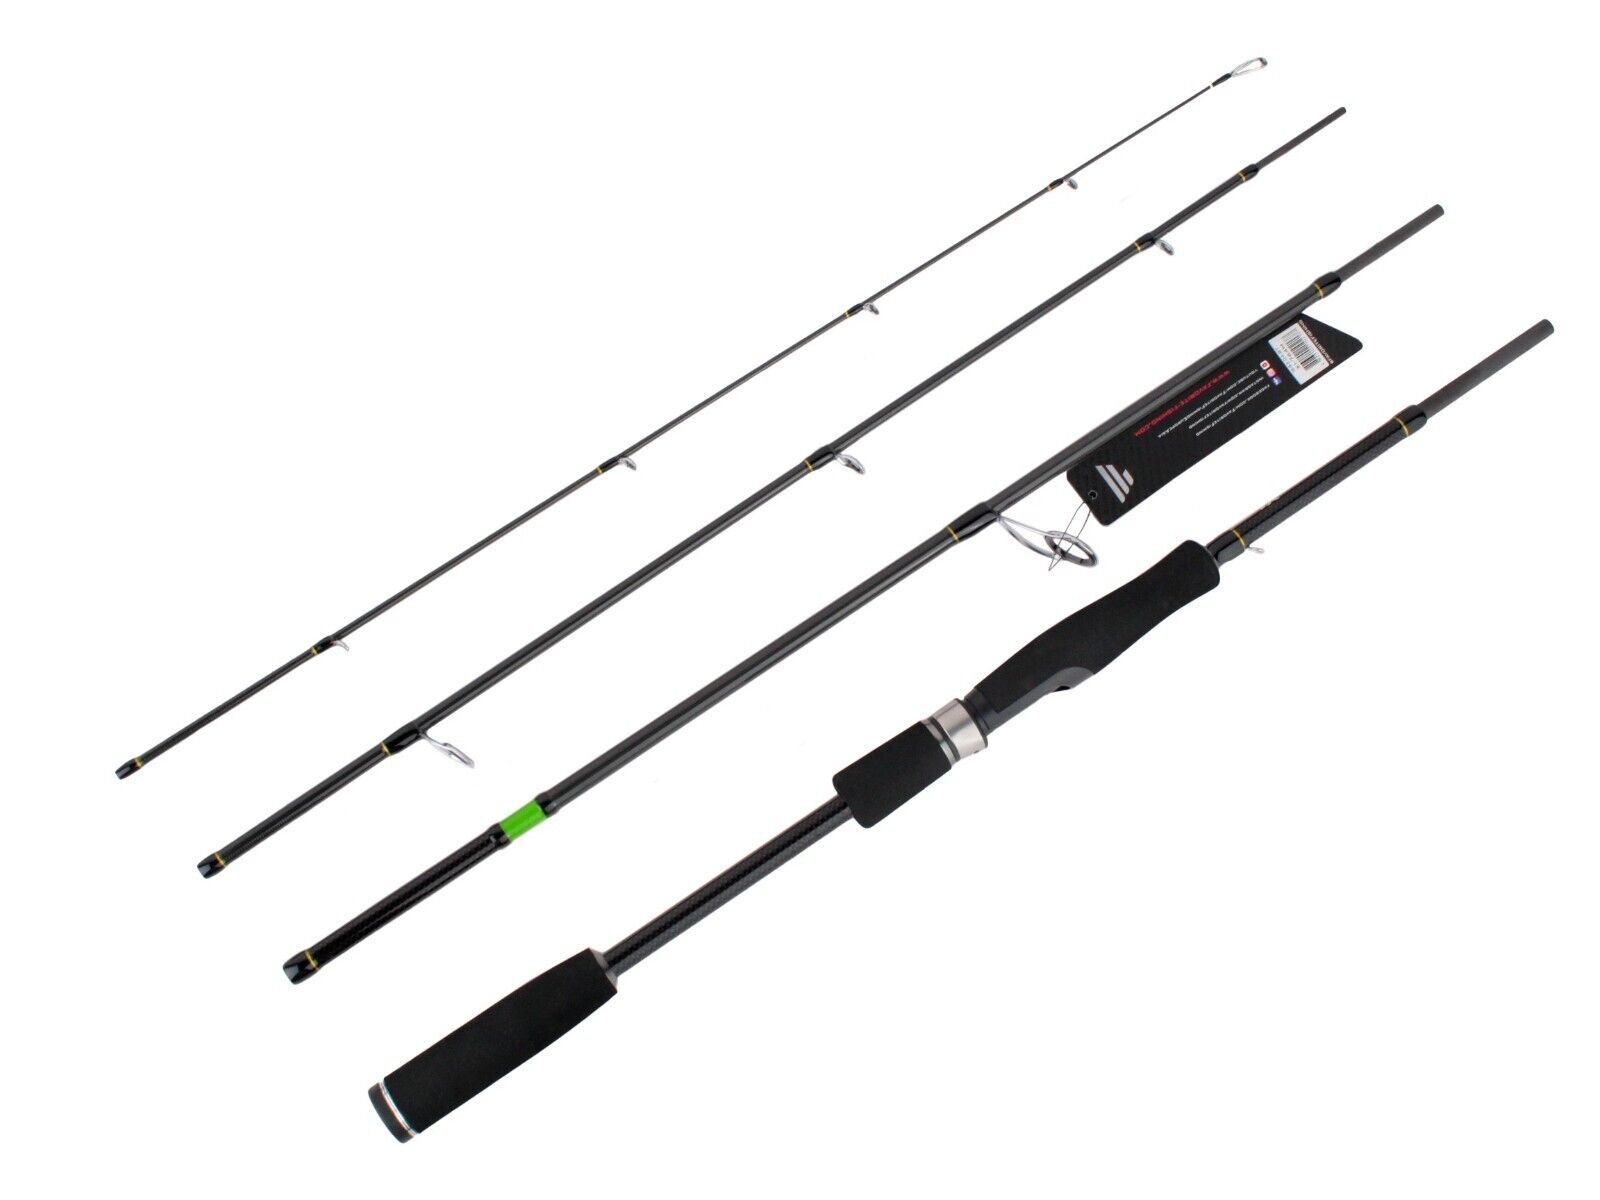 Favorite X1 Travel Rod 7ft 6in 10-32g - X1-764MH